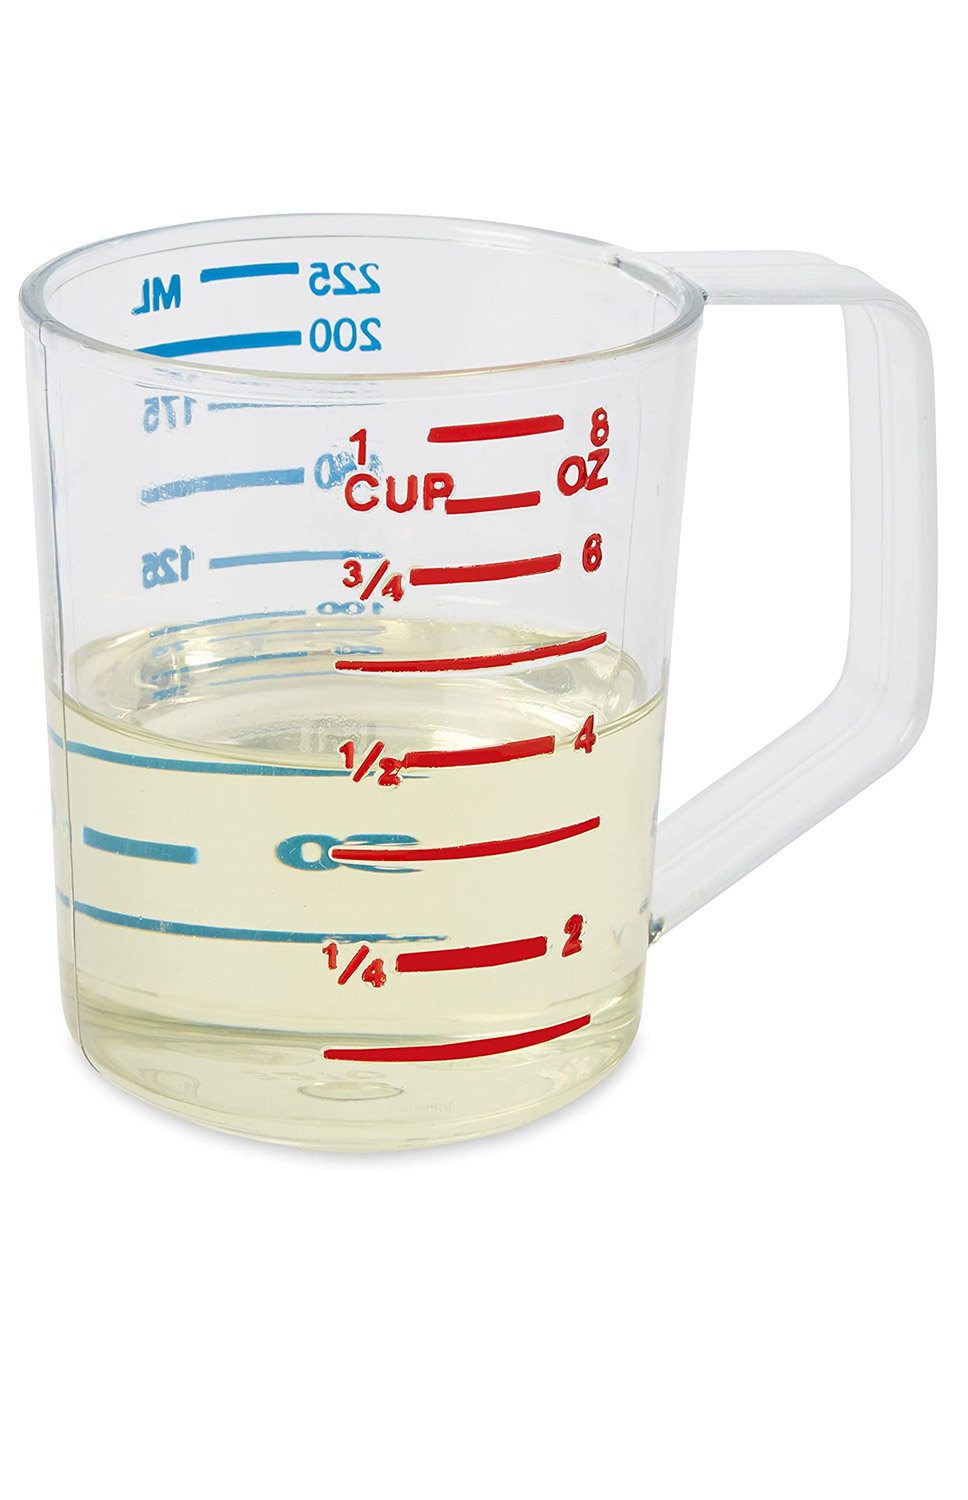 Rubbermaid Clear Measuring Cup